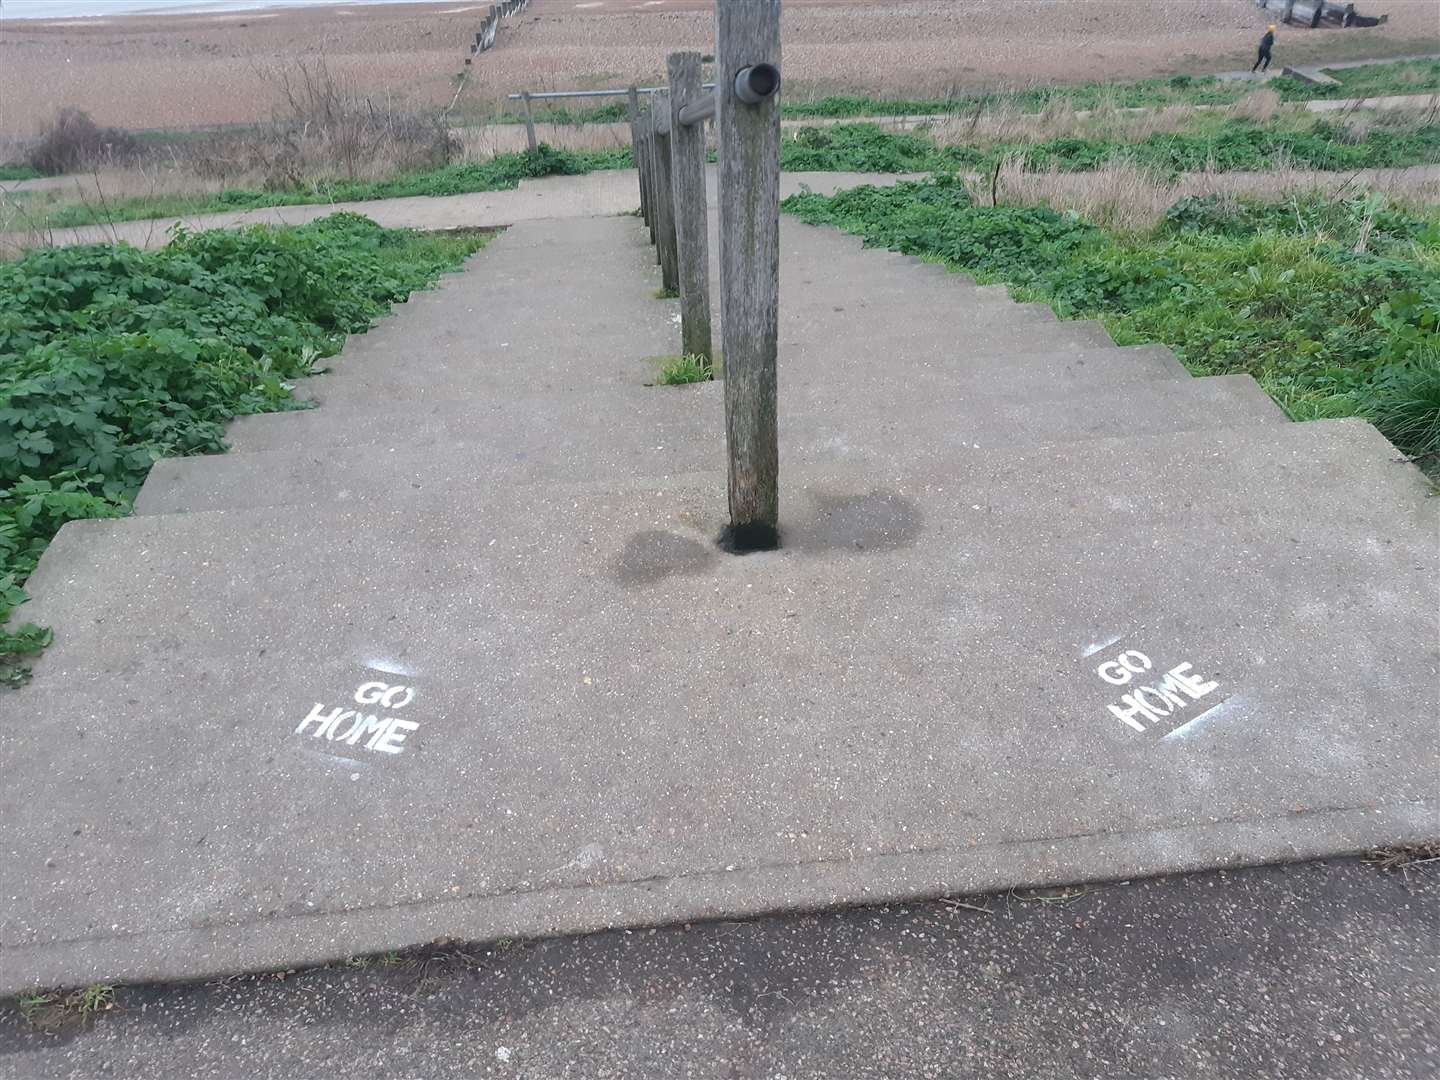 The signs have been spray painted around Tankerton. Picture: Georgina Angell